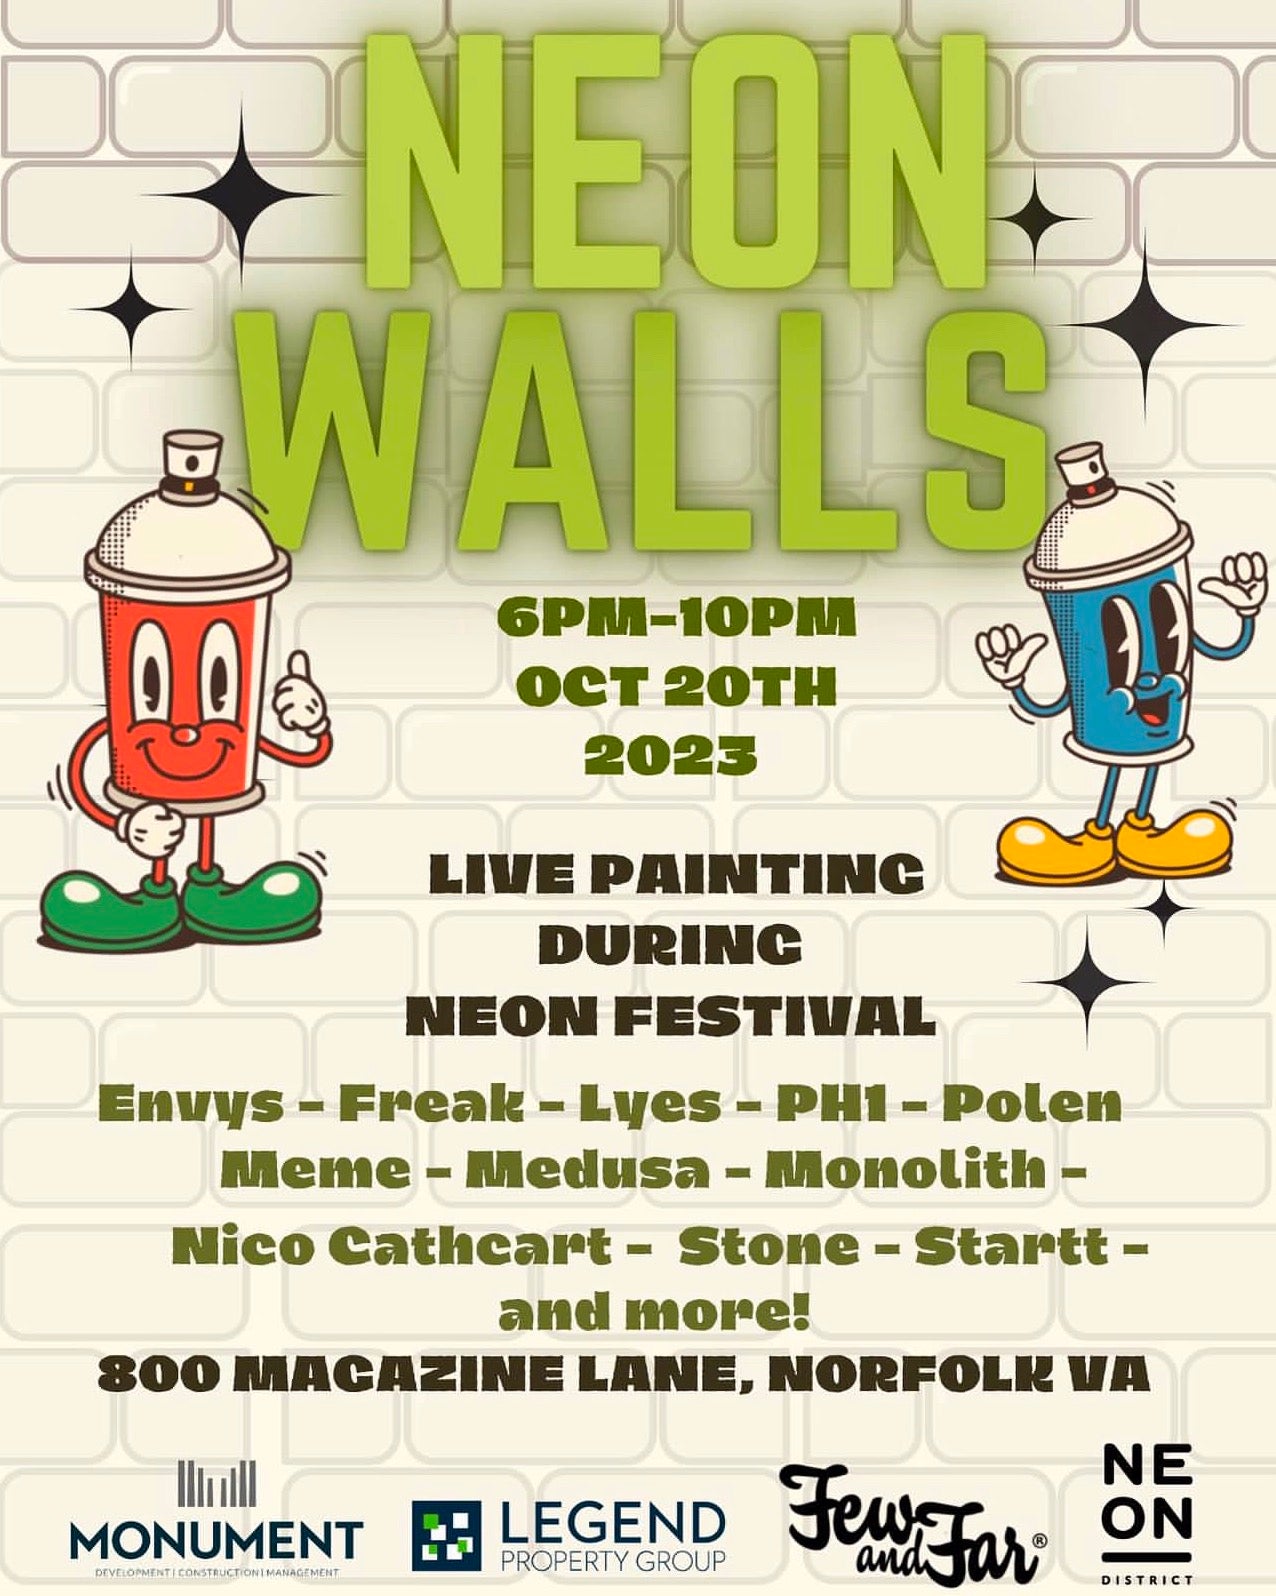 Neon Walls and The Neon Festival